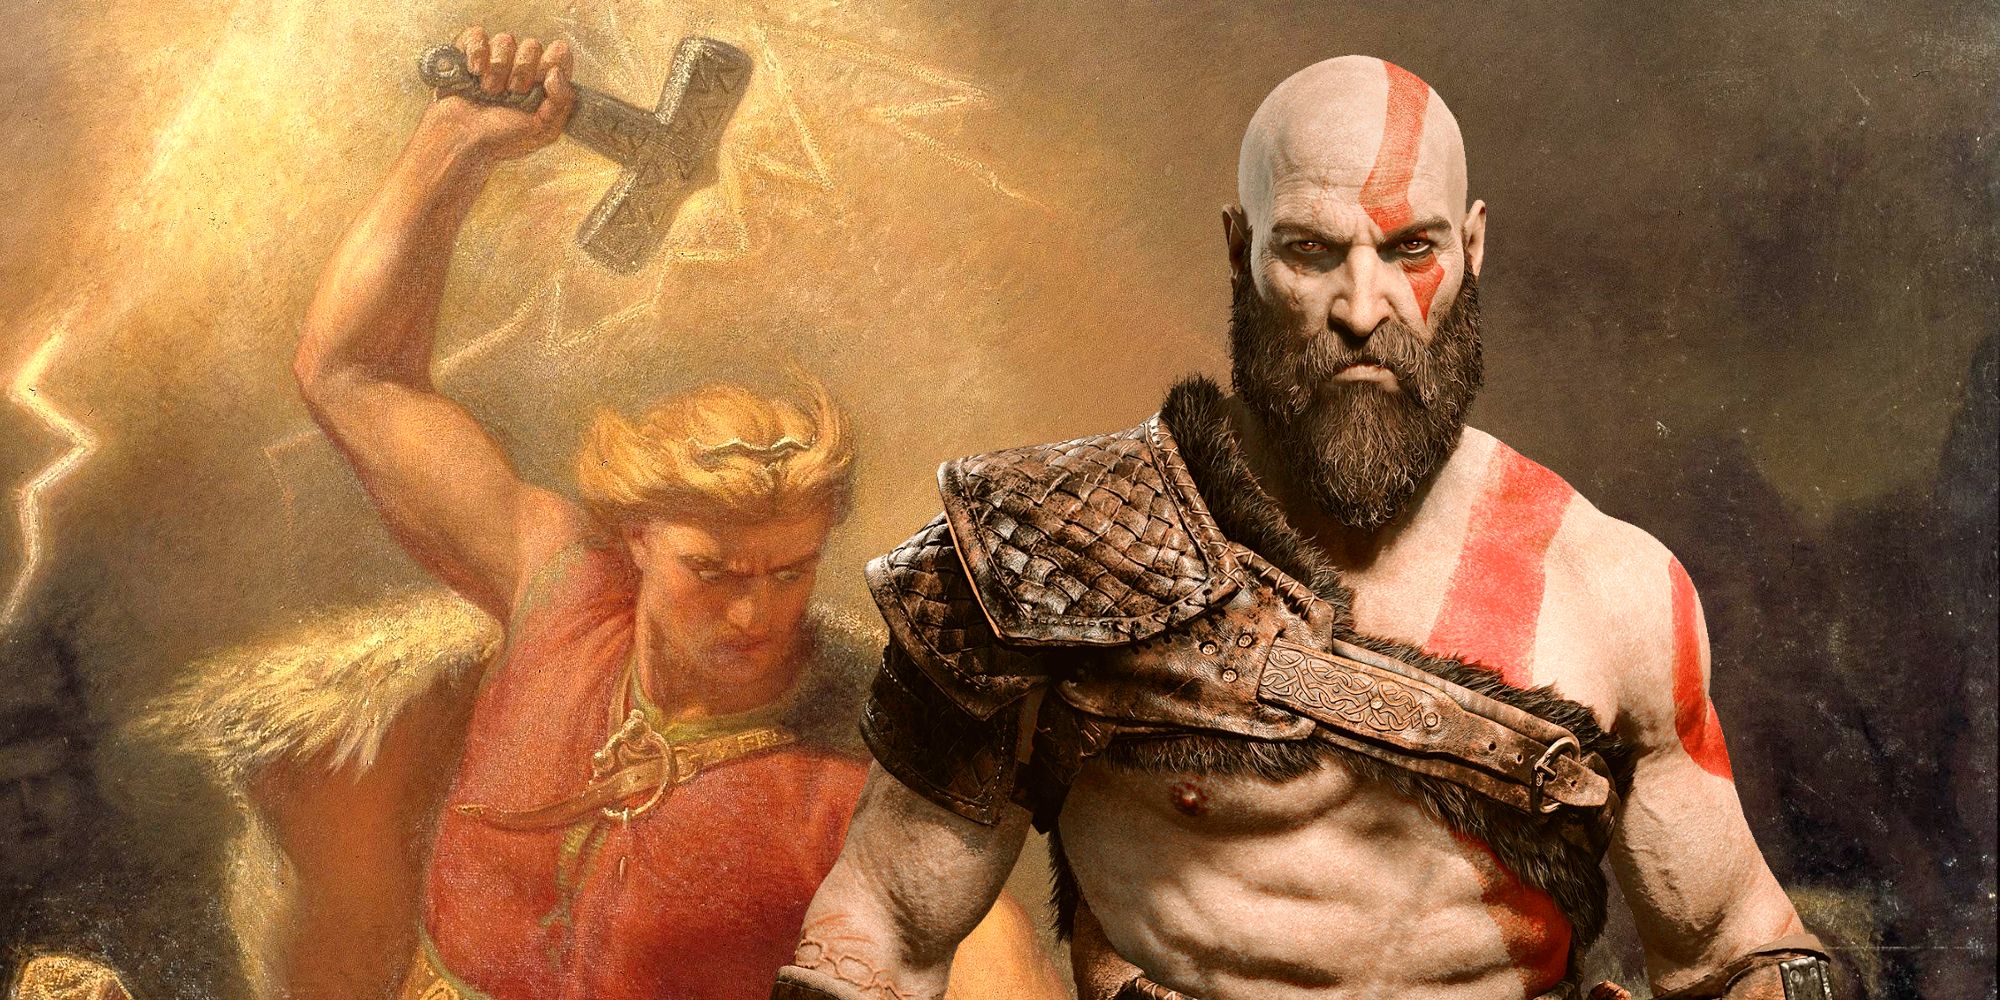 Kratos from God of War in front of a painting depicting mythological Thor wielding Mjolnir.